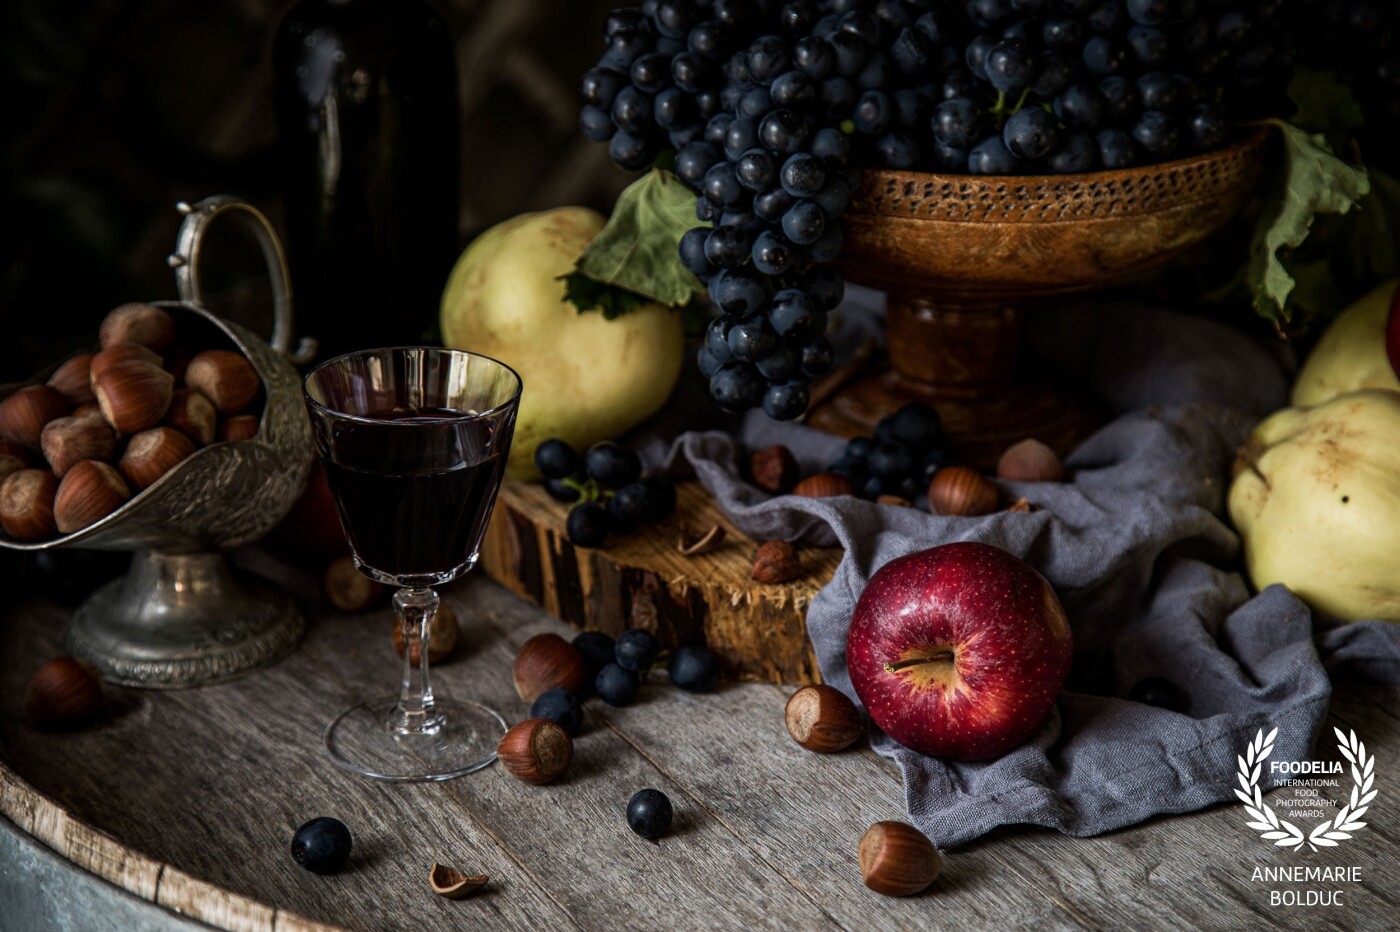 In Tumbarumba, in the foothills of the Australian Alps, cool climate wines, fruits and nuts are a speciality. Magic happened one afternoon when some fresh shiraz grapes, apples, quinces and shelled hazelnuts came to my studio. Photographed with natural light, just before dark, with time for a glass of wine. Santé!